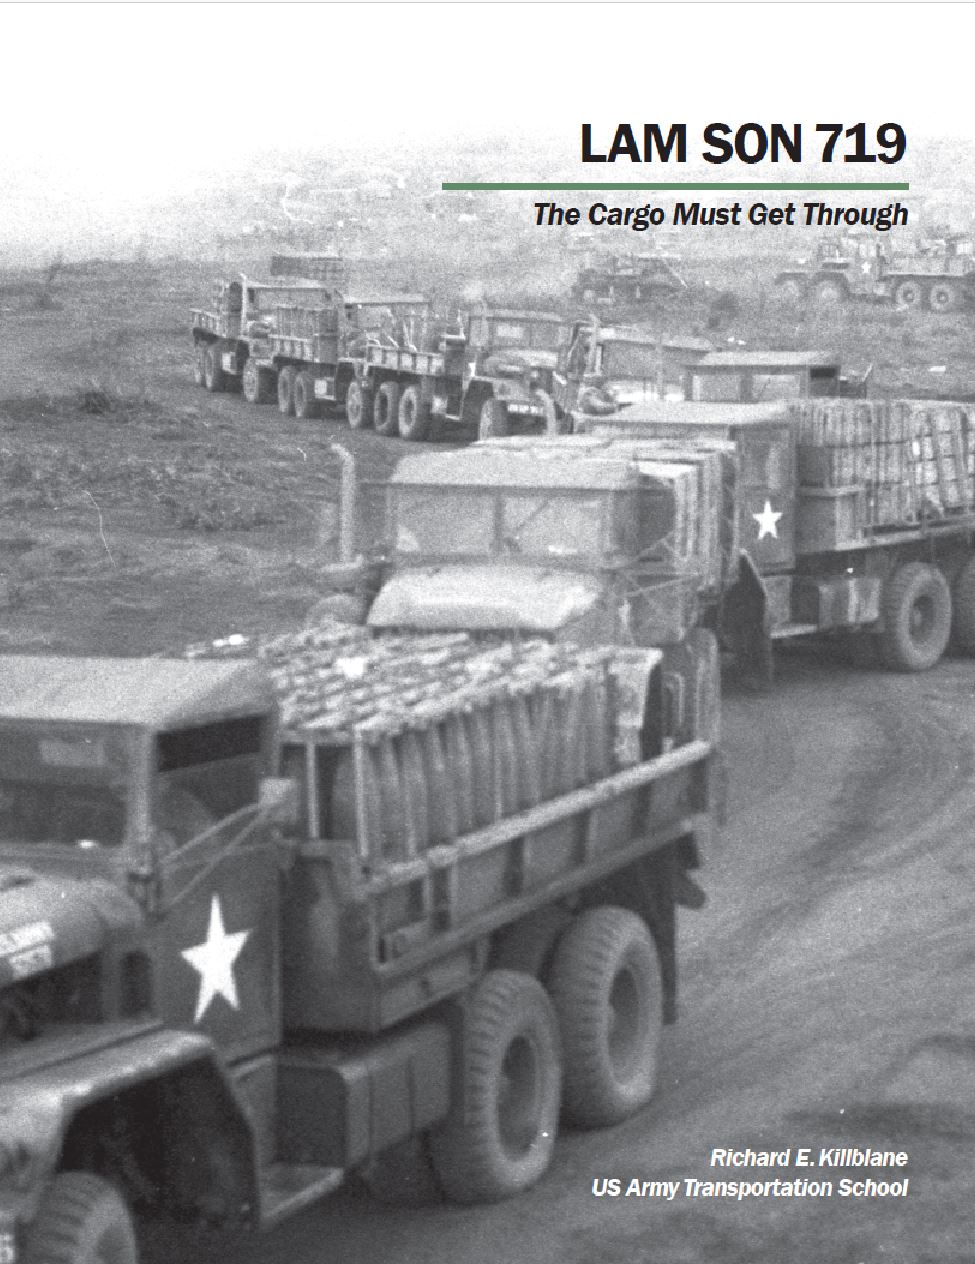 The front cover of the publication showing a truck convoy on a winding road in Vietnam